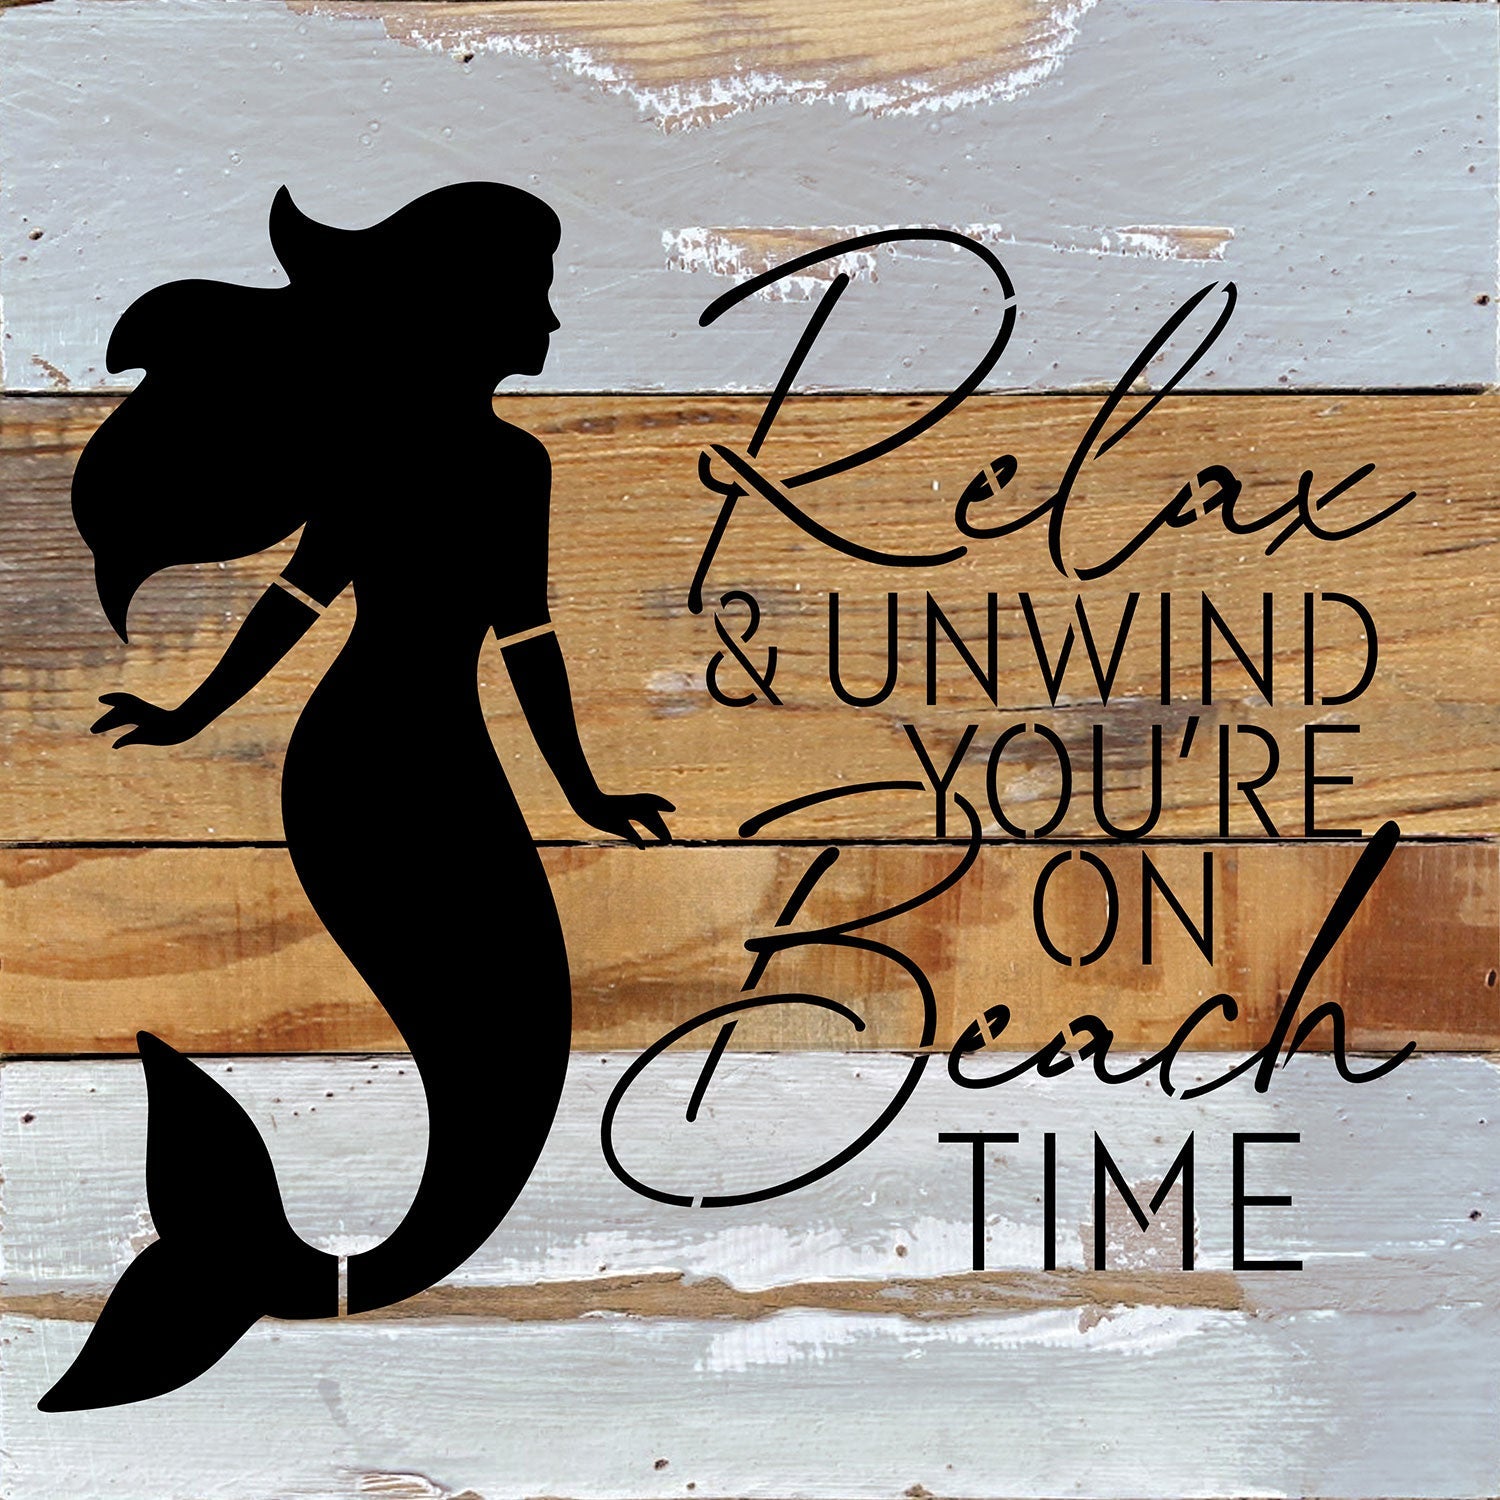 Relax & unwind. YouÕre on beach time / 10x10 Reclaimed Wood Wall Decor